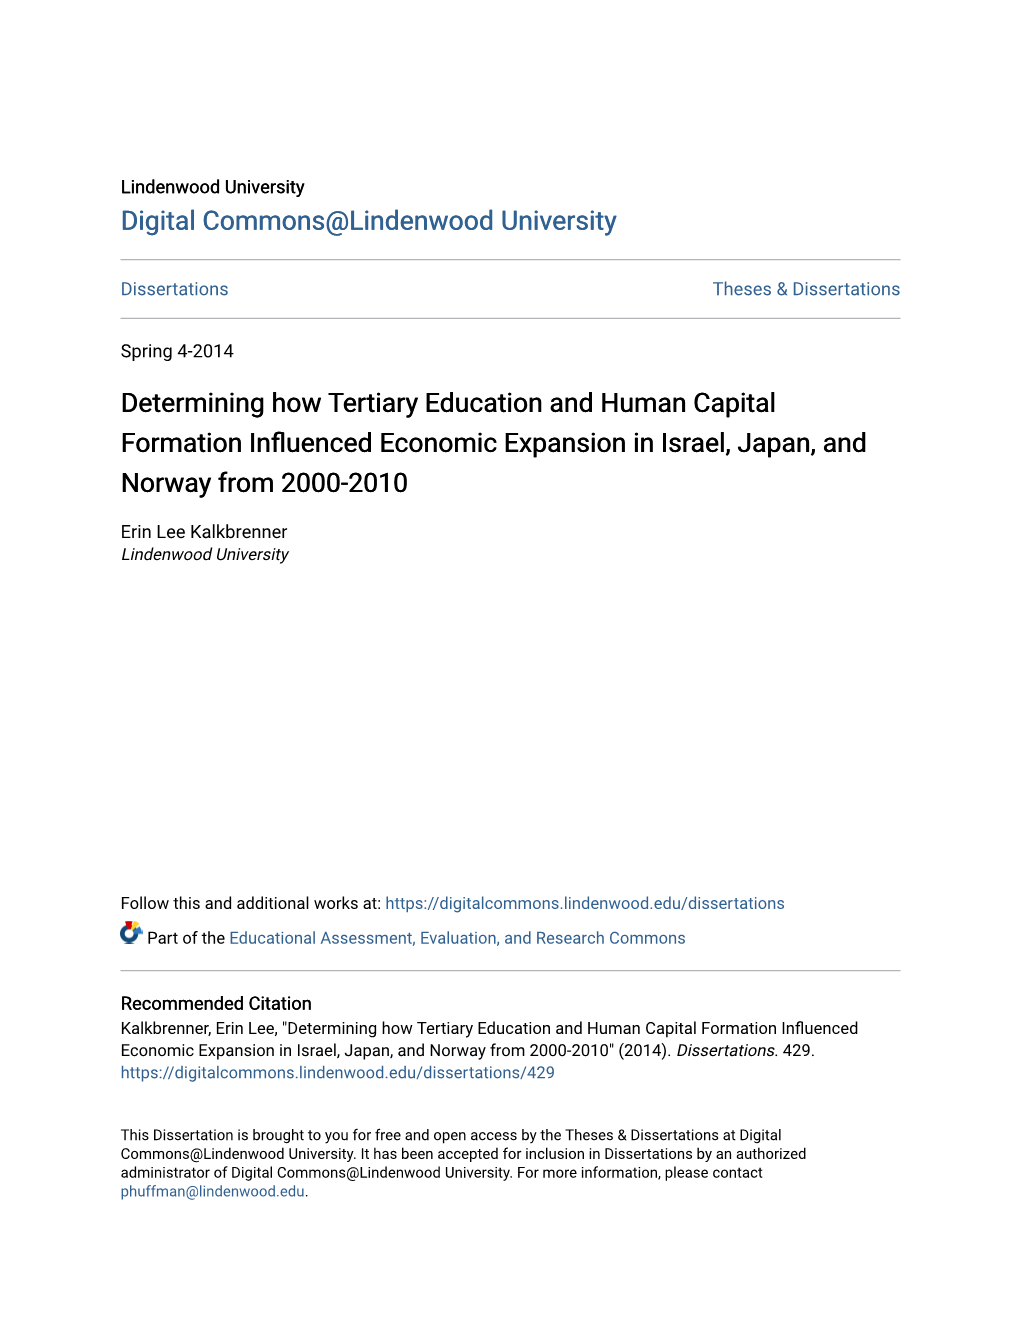 Determining How Tertiary Education and Human Capital Formation Influenced Conomice Expansion in Israel, Japan, and Norway from 2000-2010